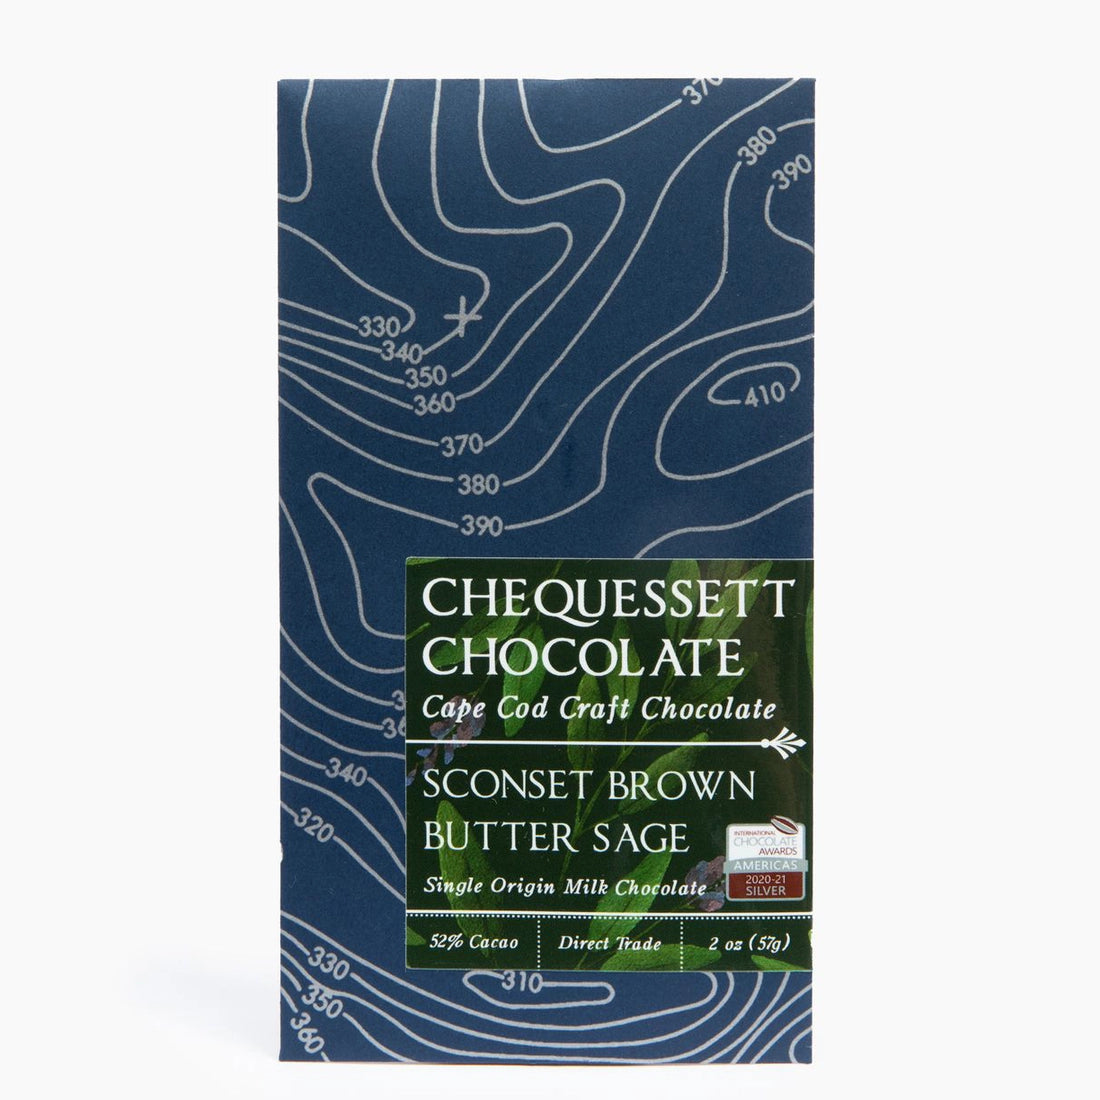 Chequessett Chocolate - Sconset Brown Butter Sage